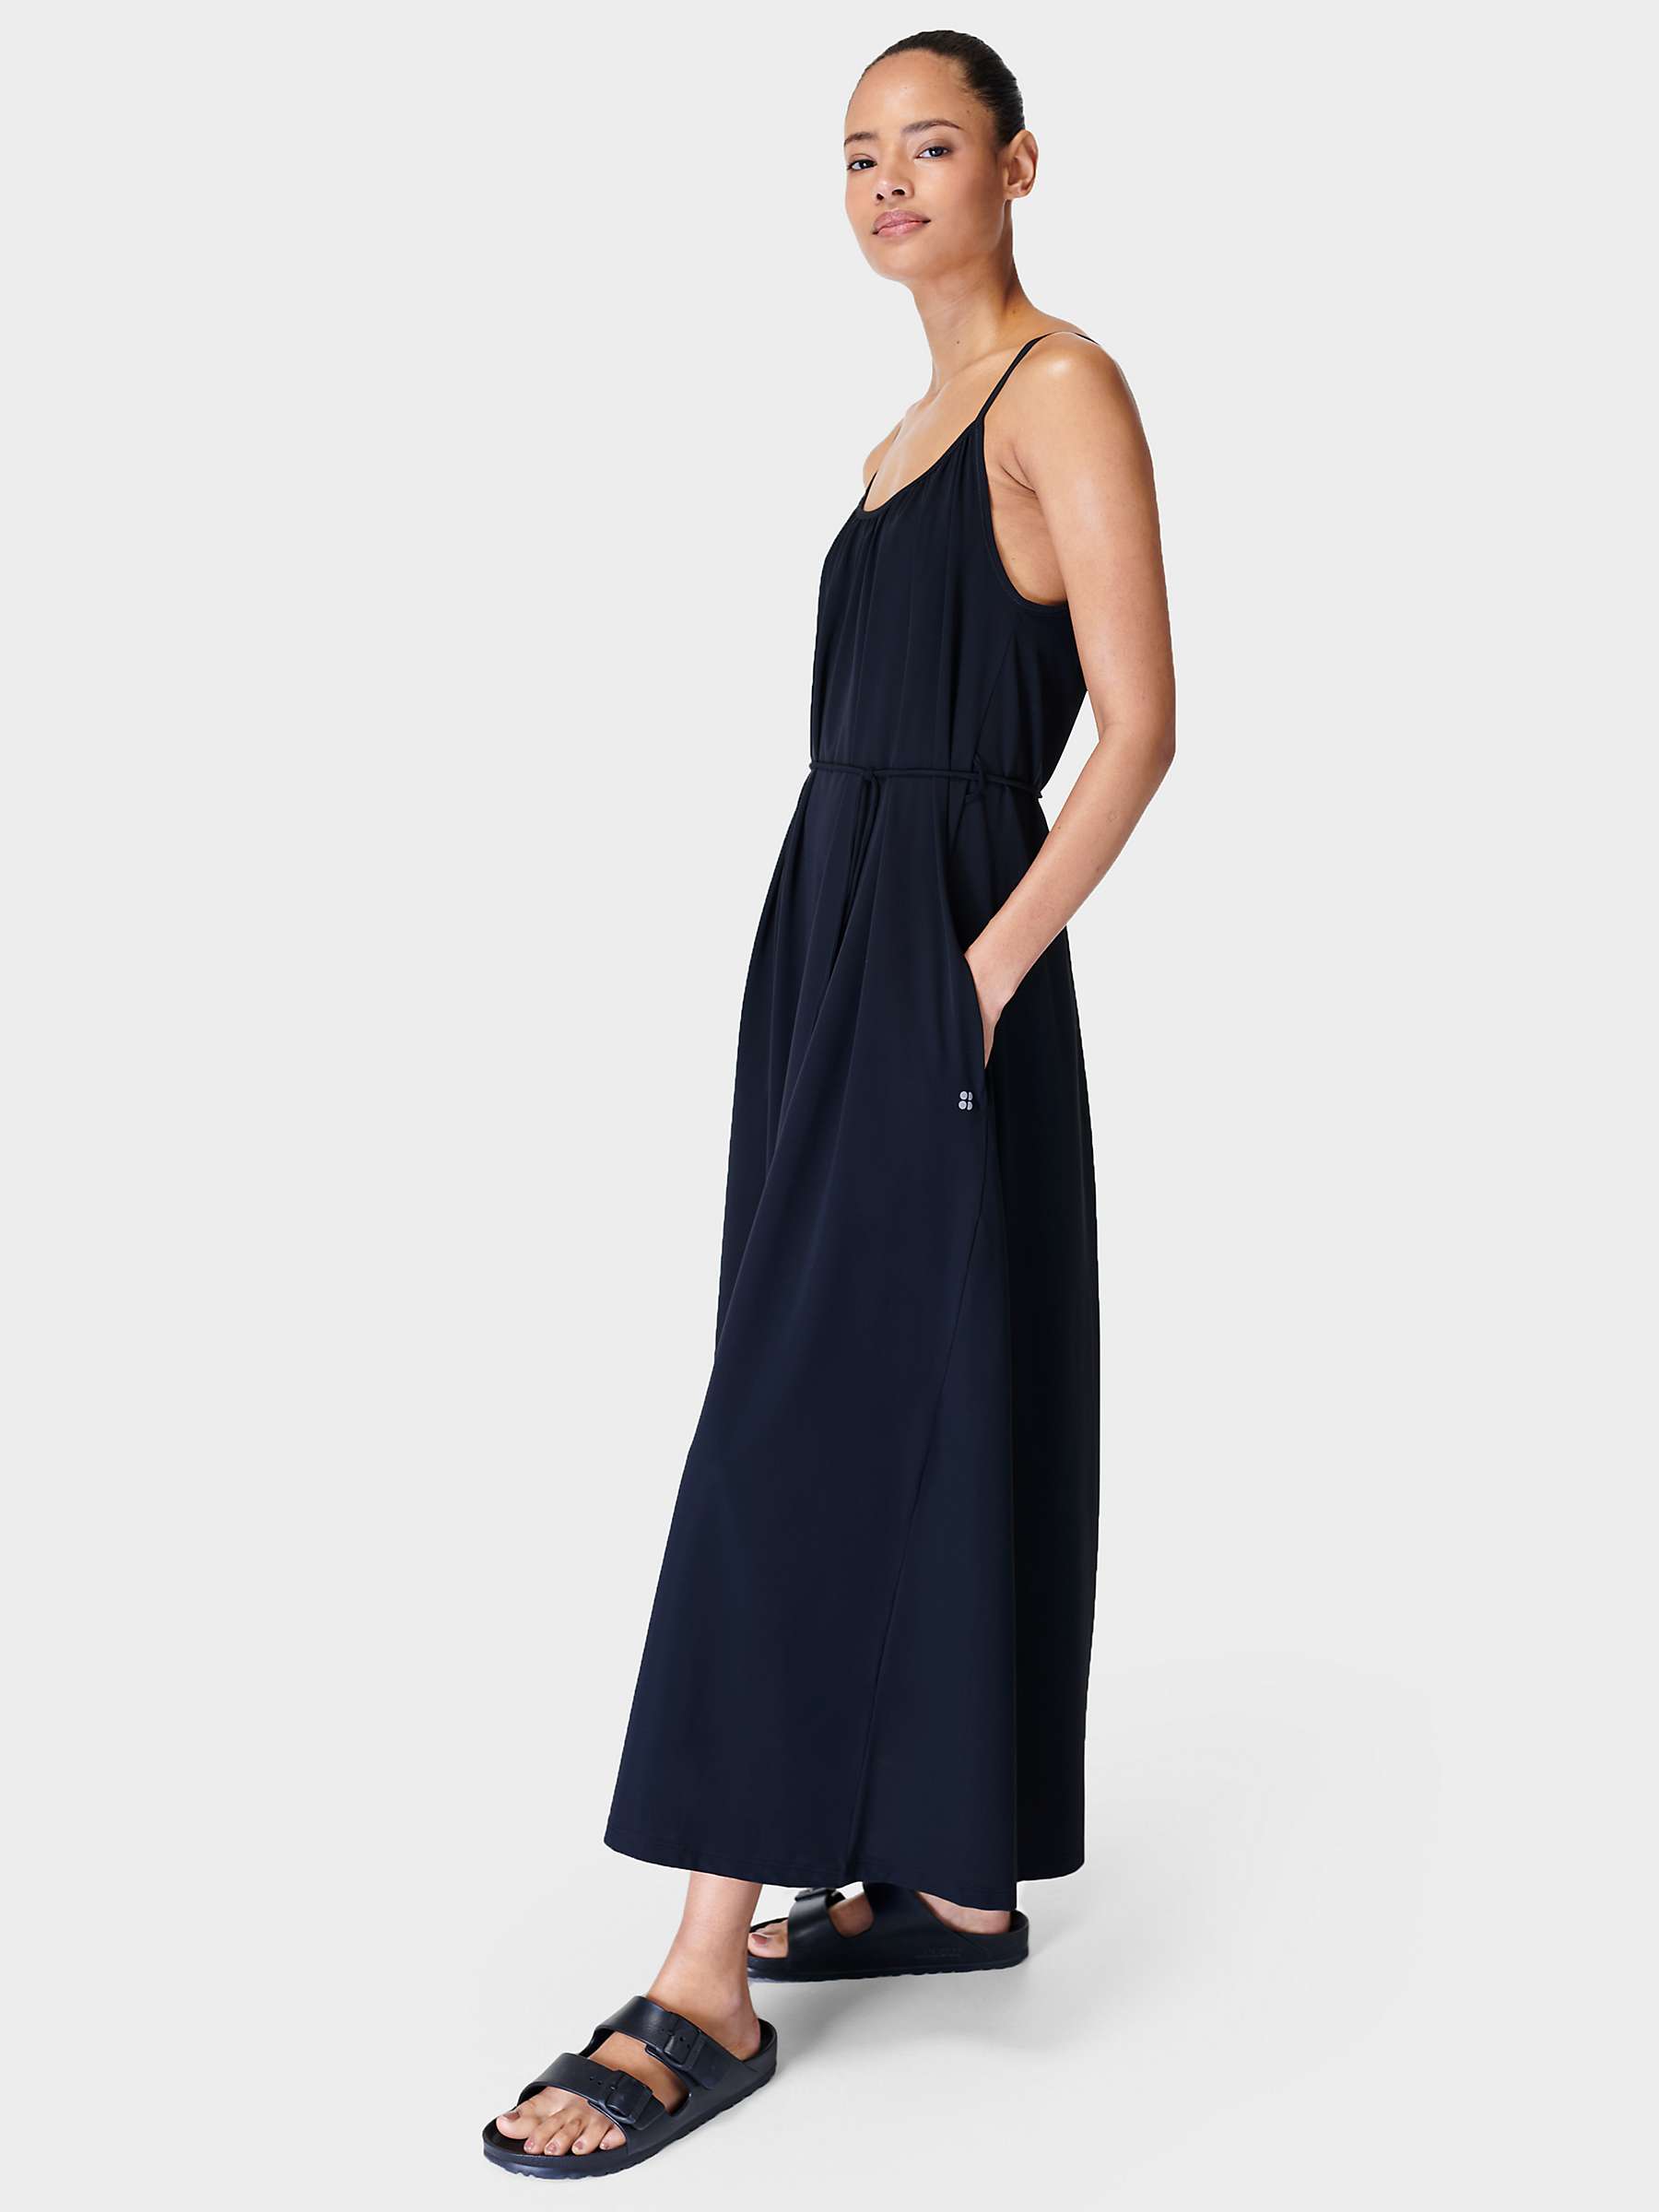 Buy Sweaty Betty Explore Strappy Summer Dress Online at johnlewis.com